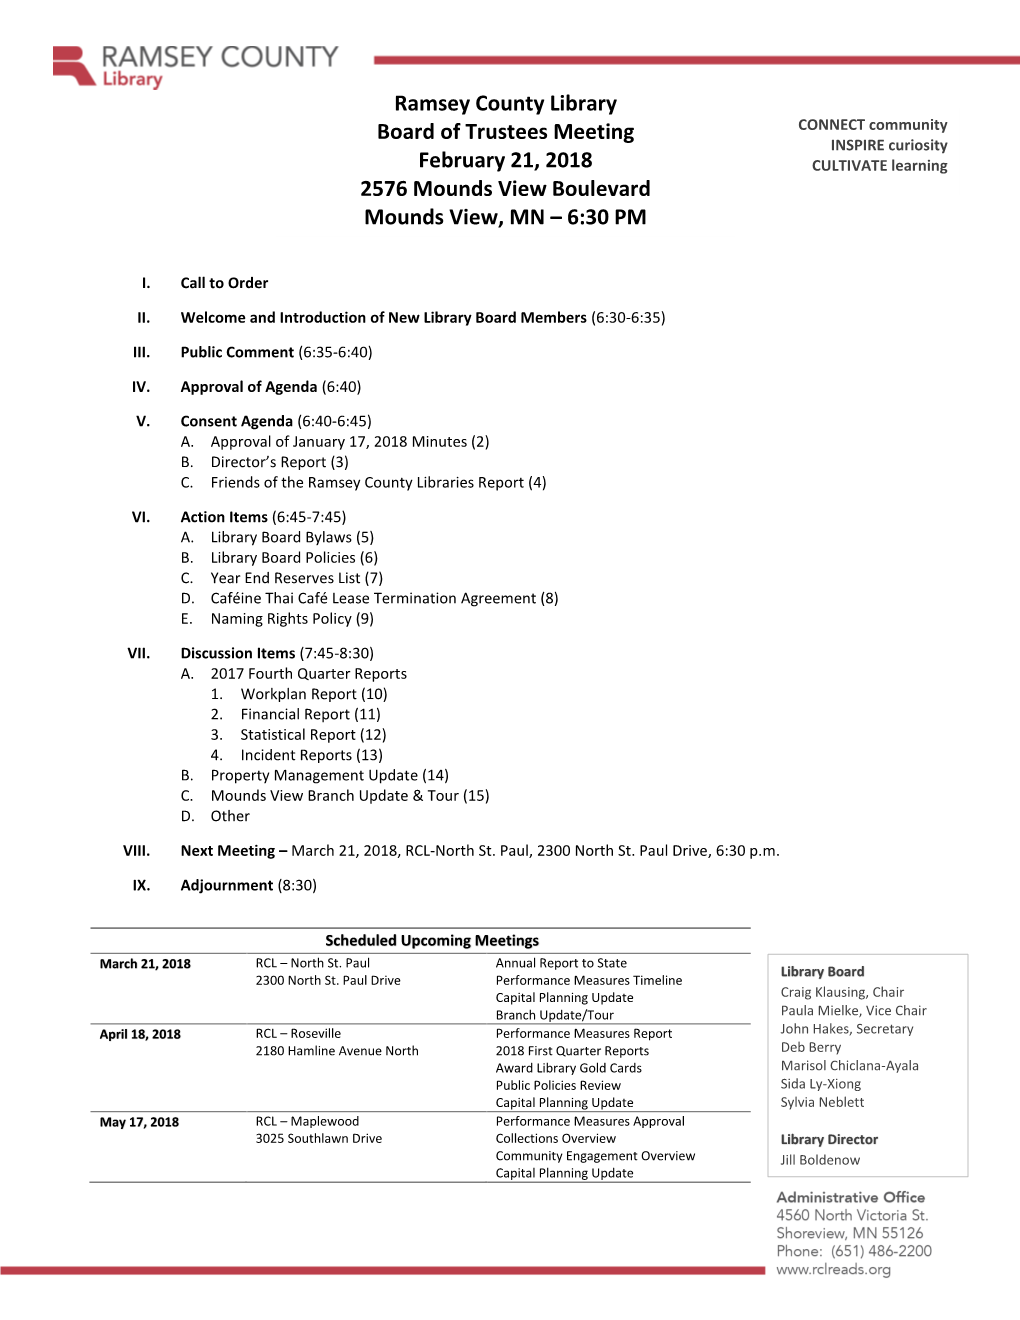 Ramsey County Library Board of Trustees Meeting February 21